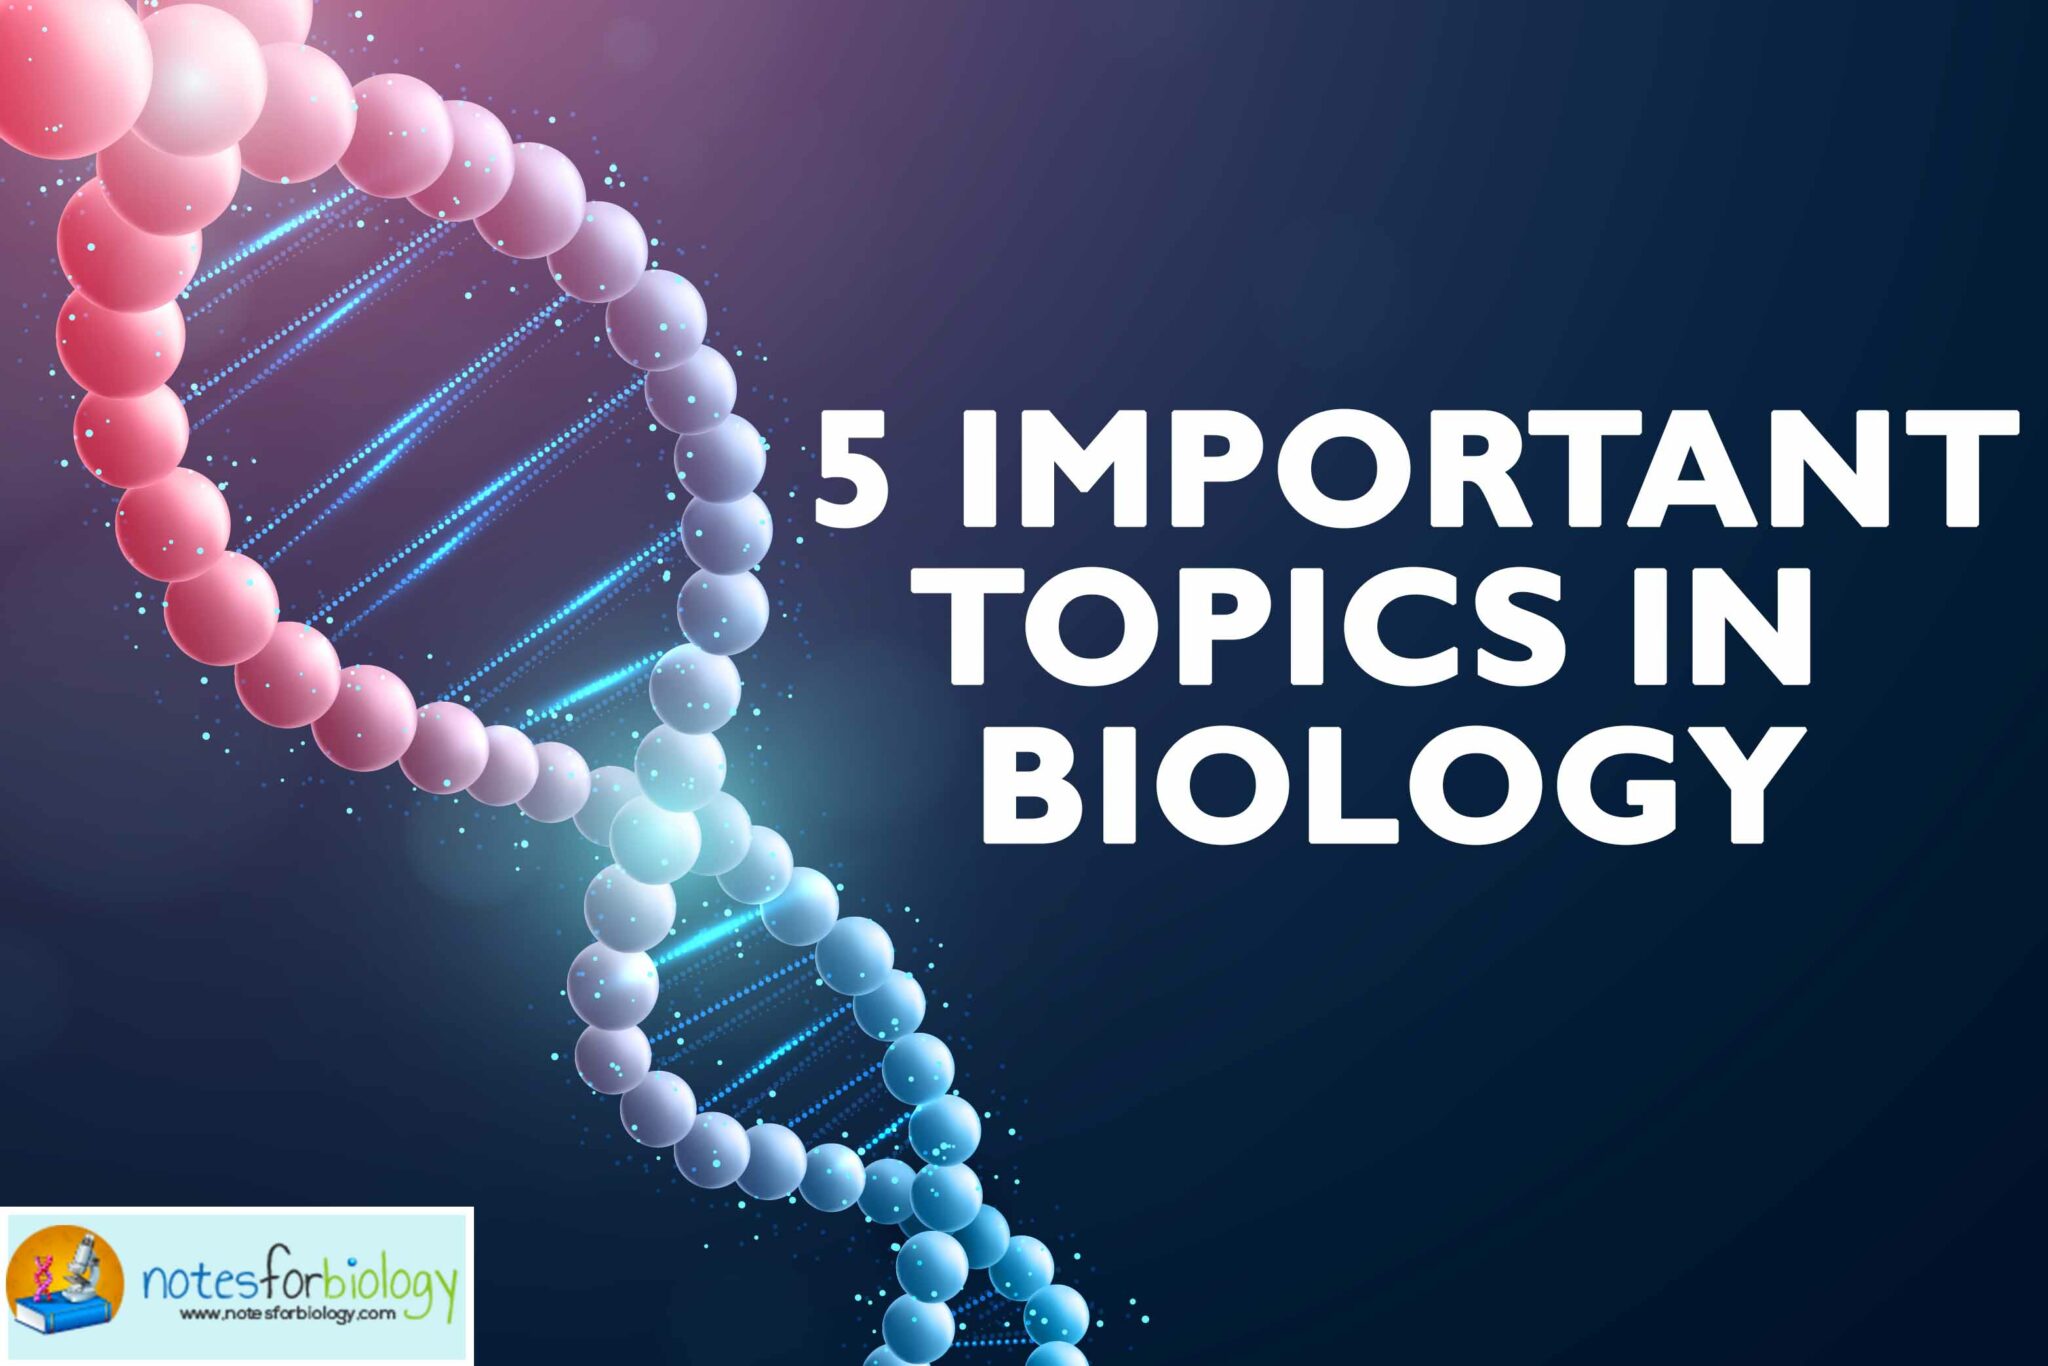 research topics under biology